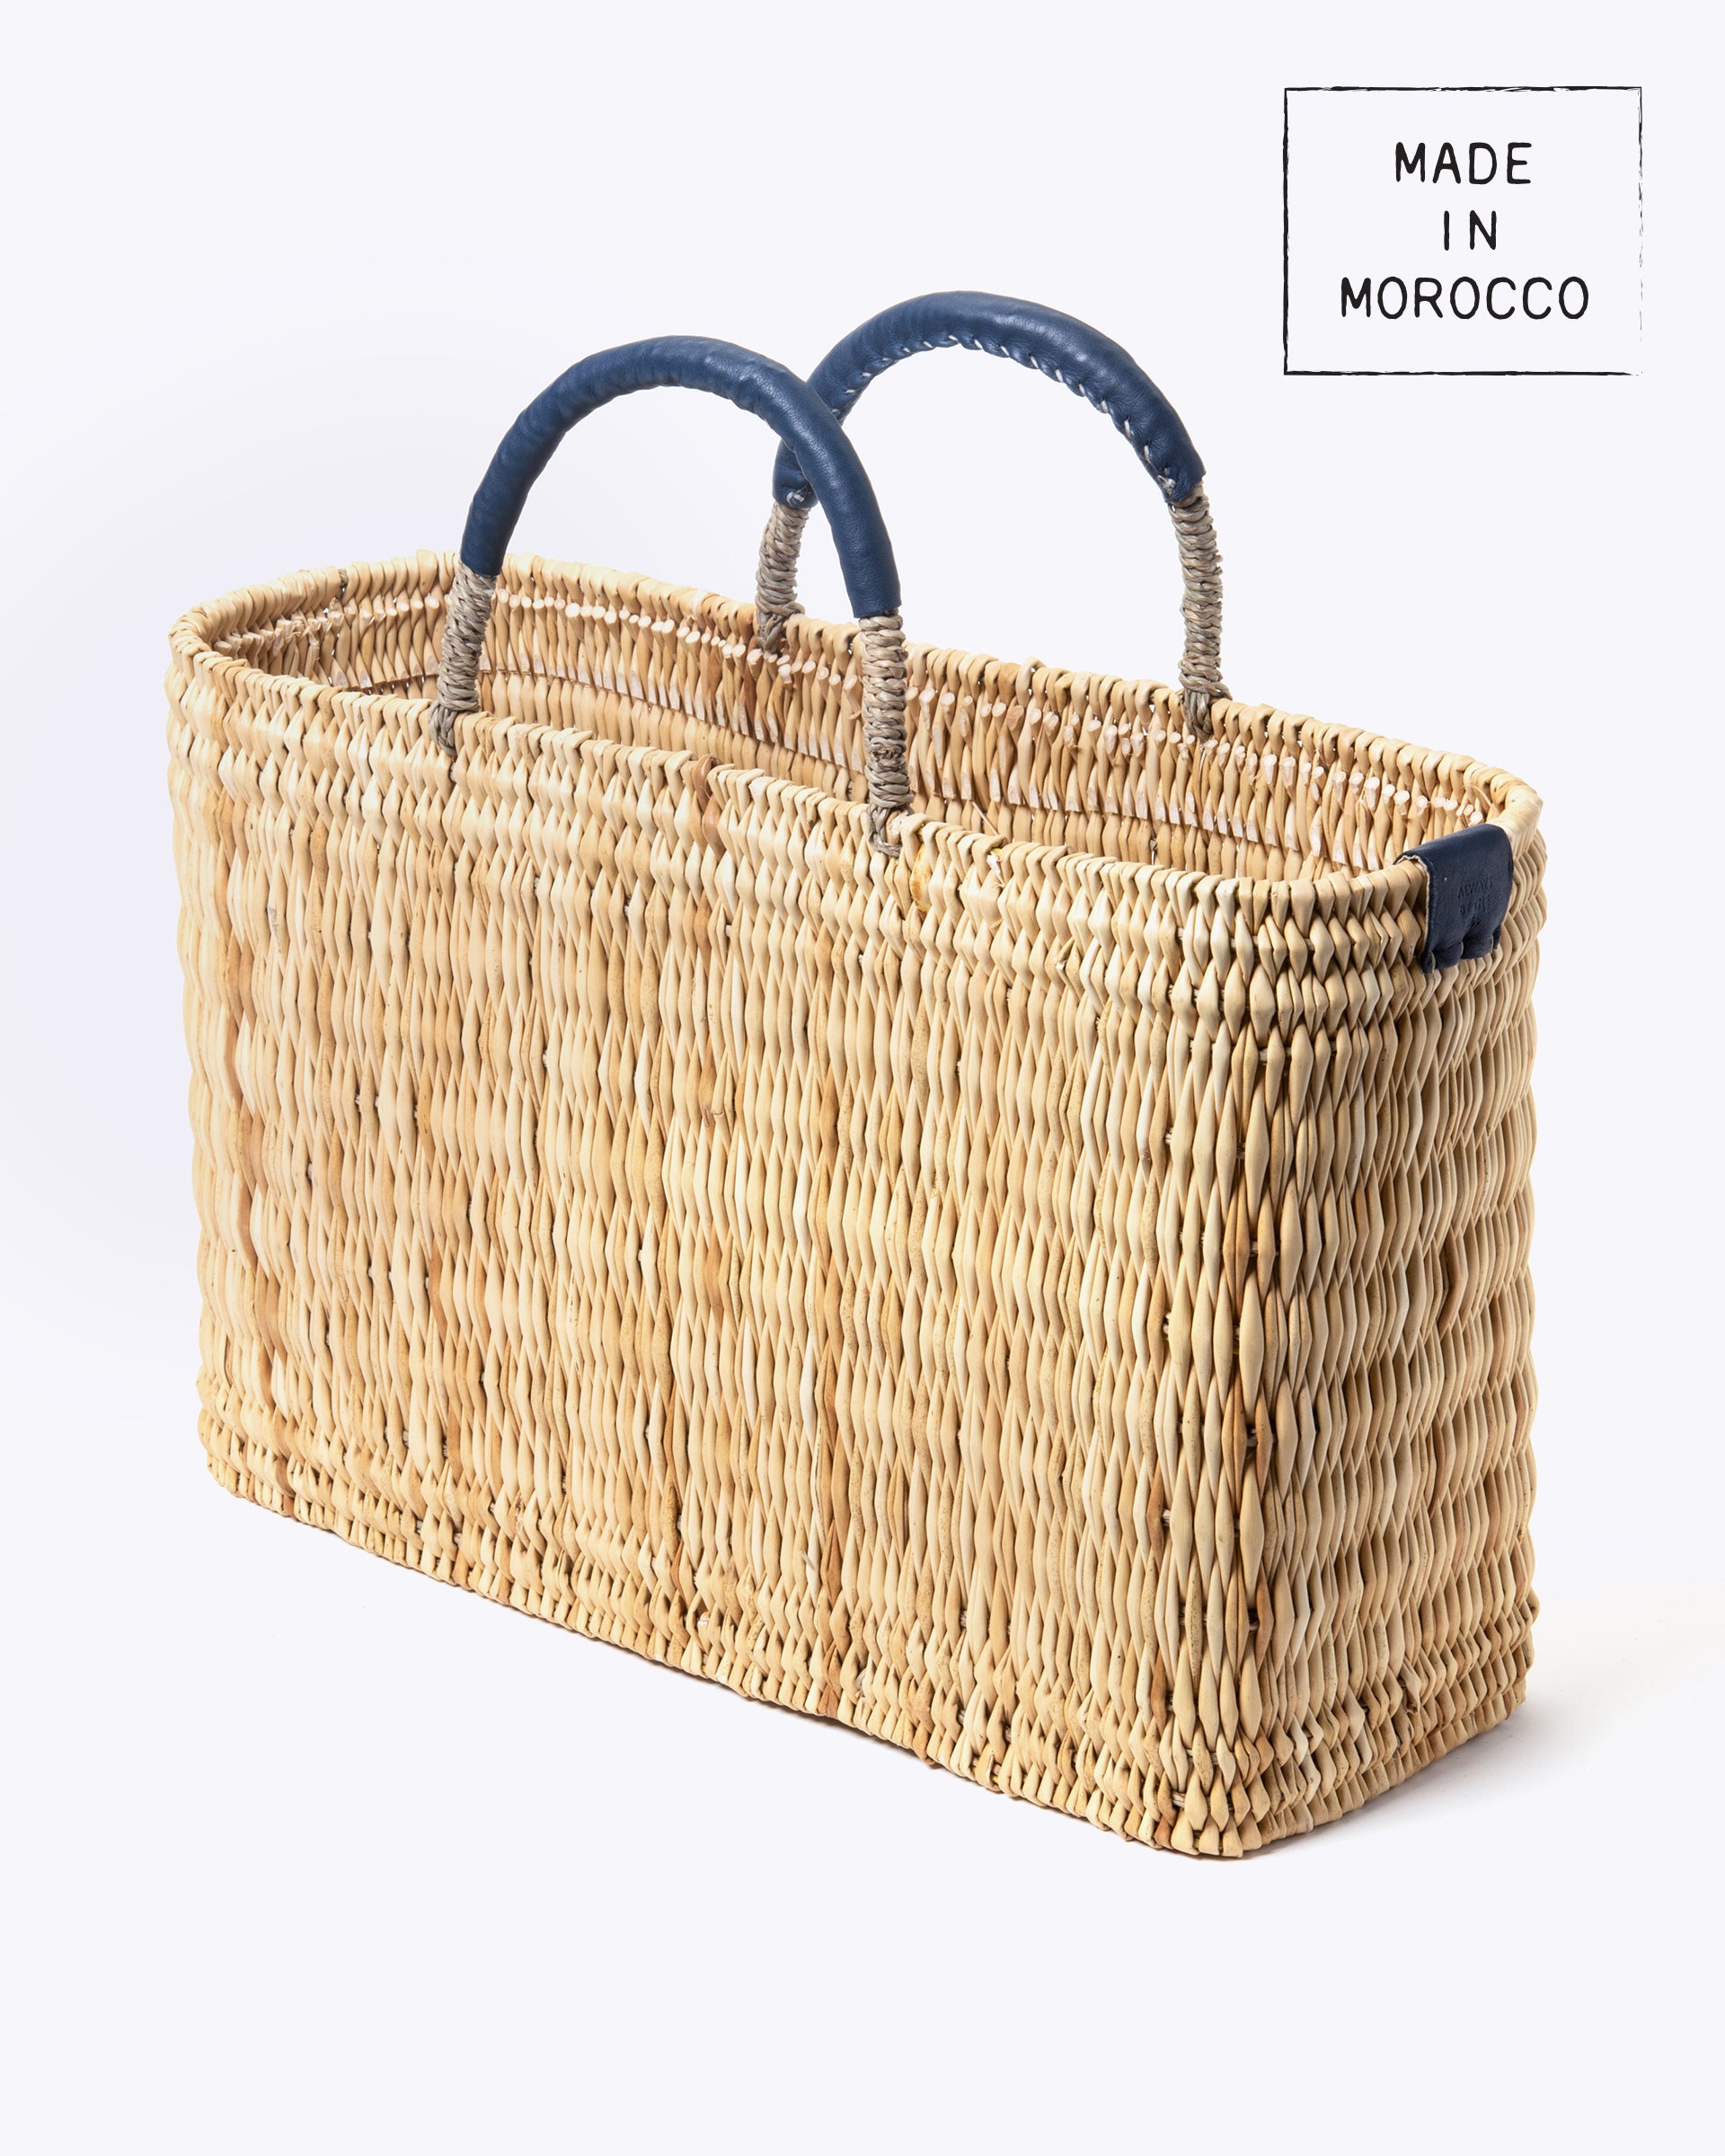 medium straw basket wrapped with dark blue leather handle on a white background at an angle